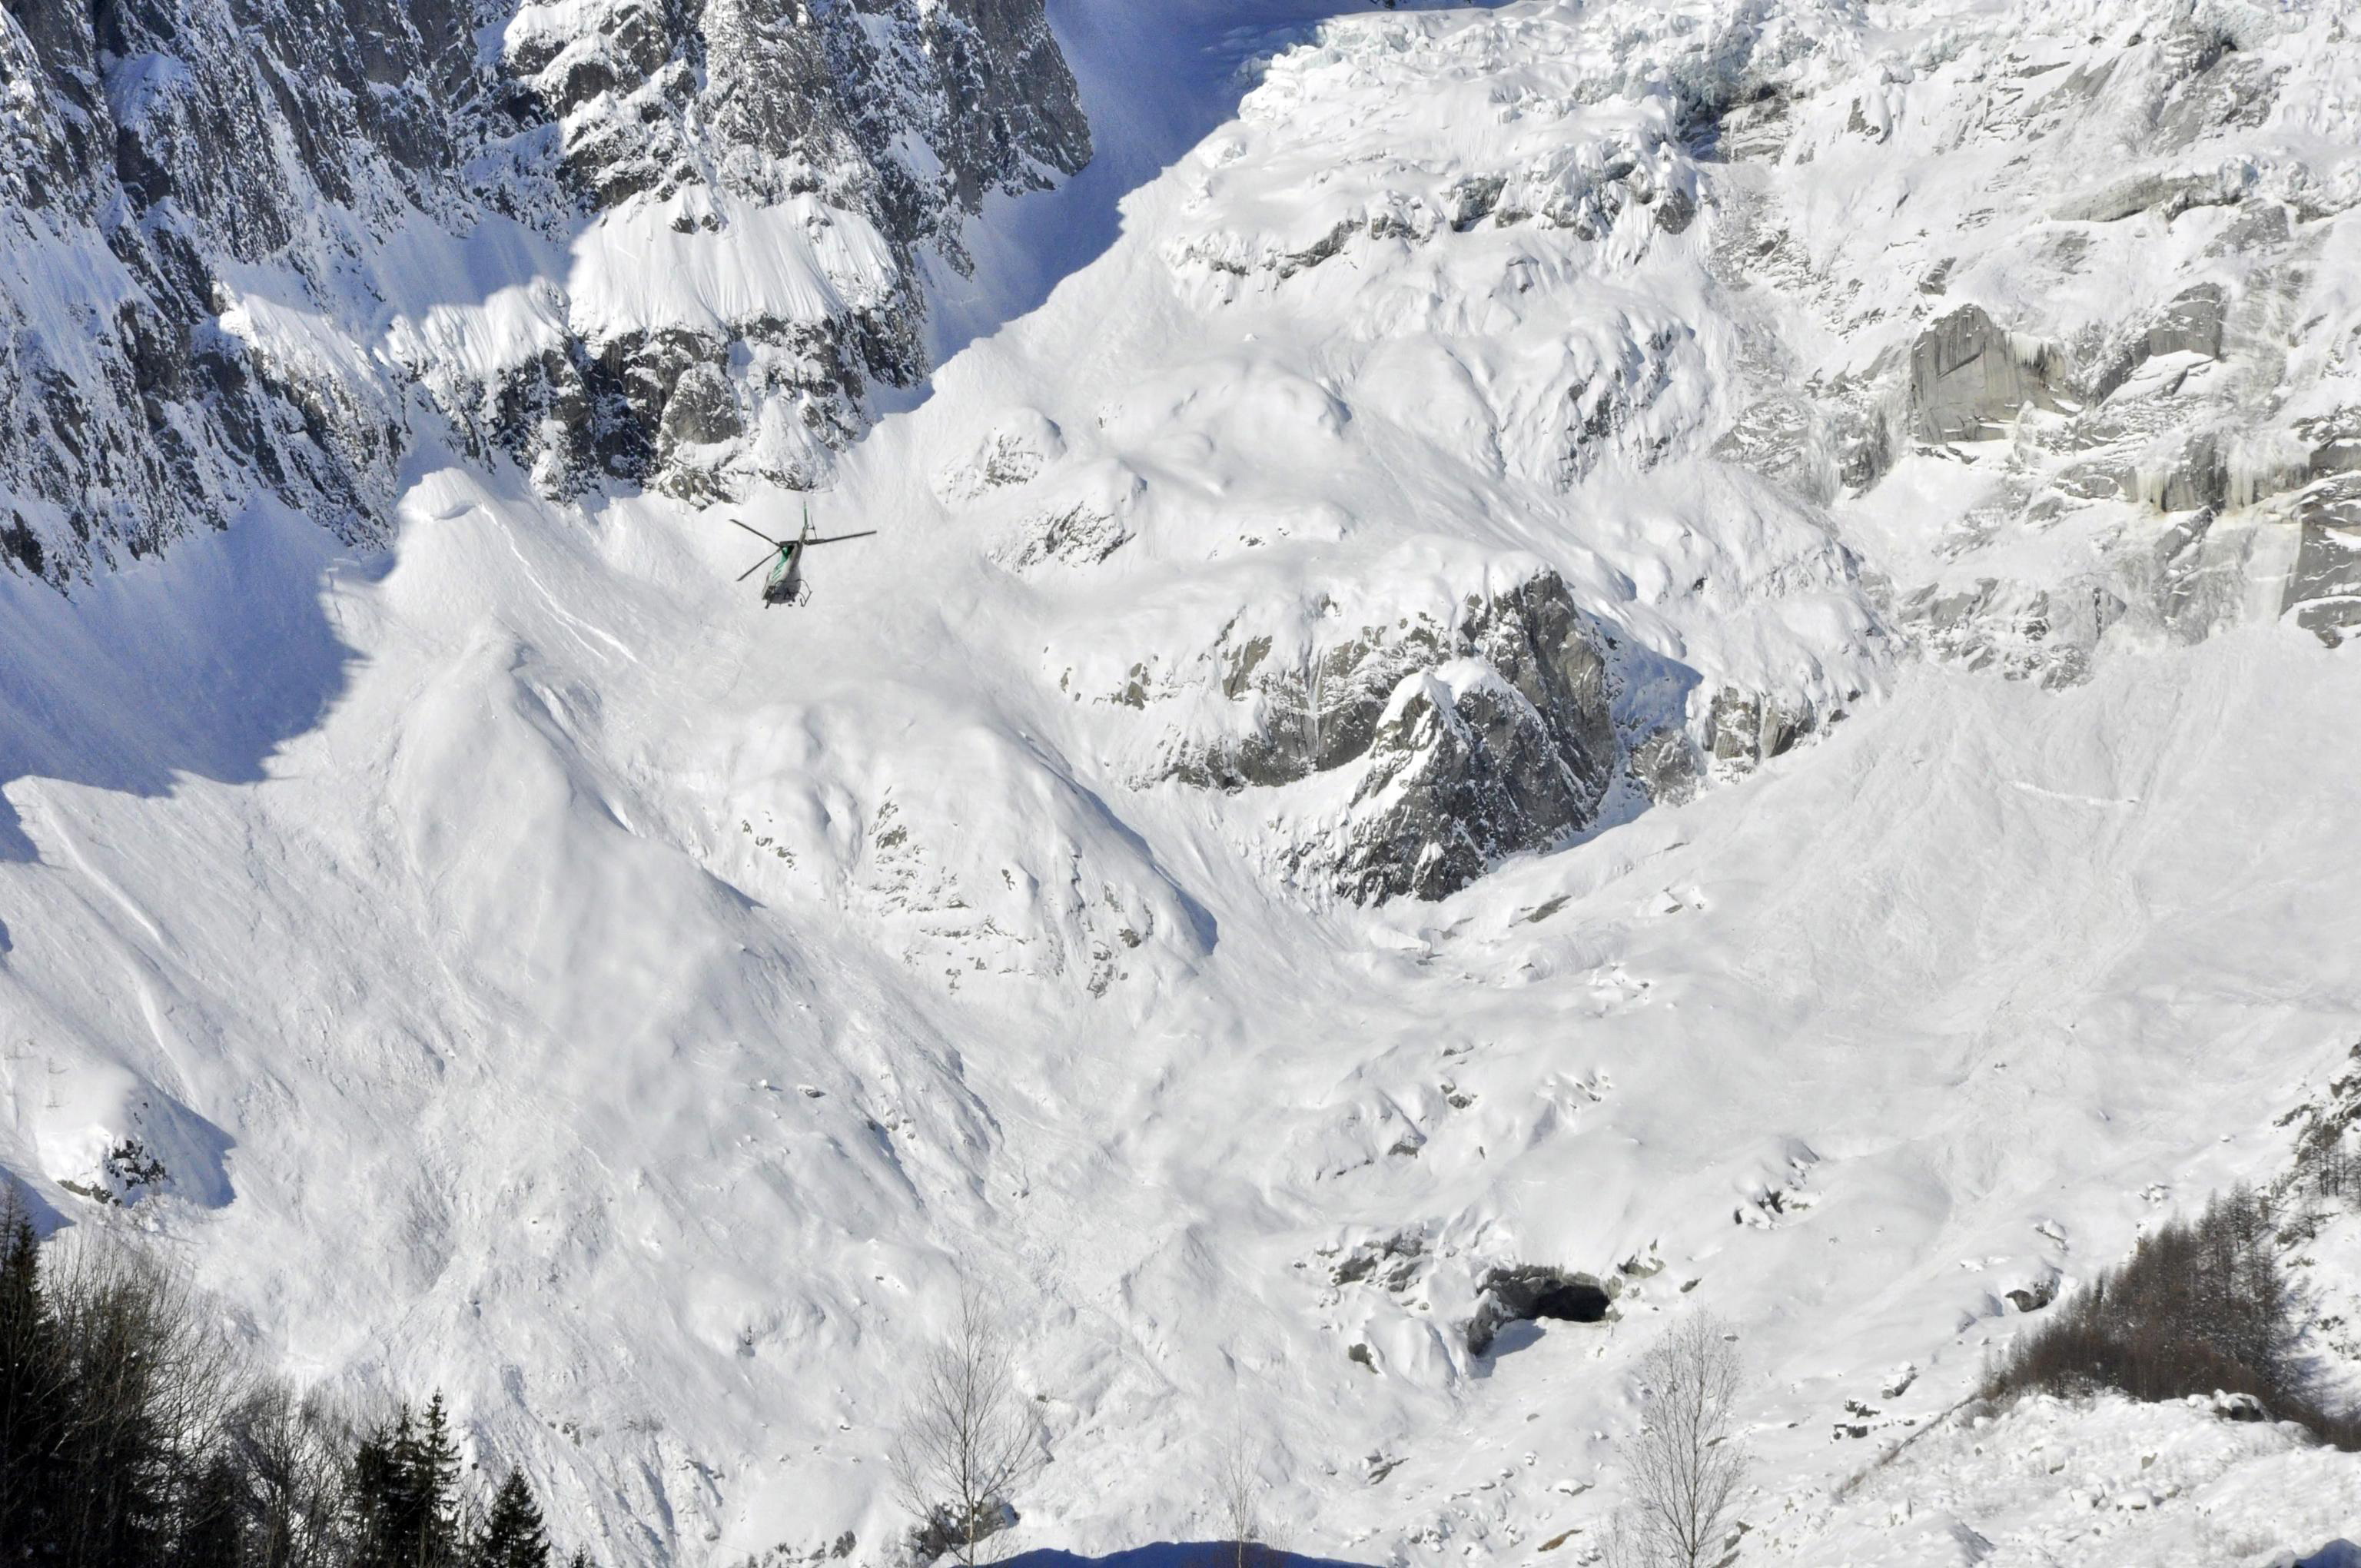 epa07342657 Recovery operations underway for the bodies of three free riders killed in an avalanche in Val Veny, identified as two British and a French, near the Alpine resort of Courmayeur, northwest Italy, 04 February 2019. The bodies of three people were found under an avalanche in the Canale degli Spagnoli, in Val Veny. Two British and two French skiers were reported missing on 03 February afternoon as high risk for avalanches was reported in the area. Searchers were said to be looking for the missing fourth skier.  EPA/THIERRY PRONESTI